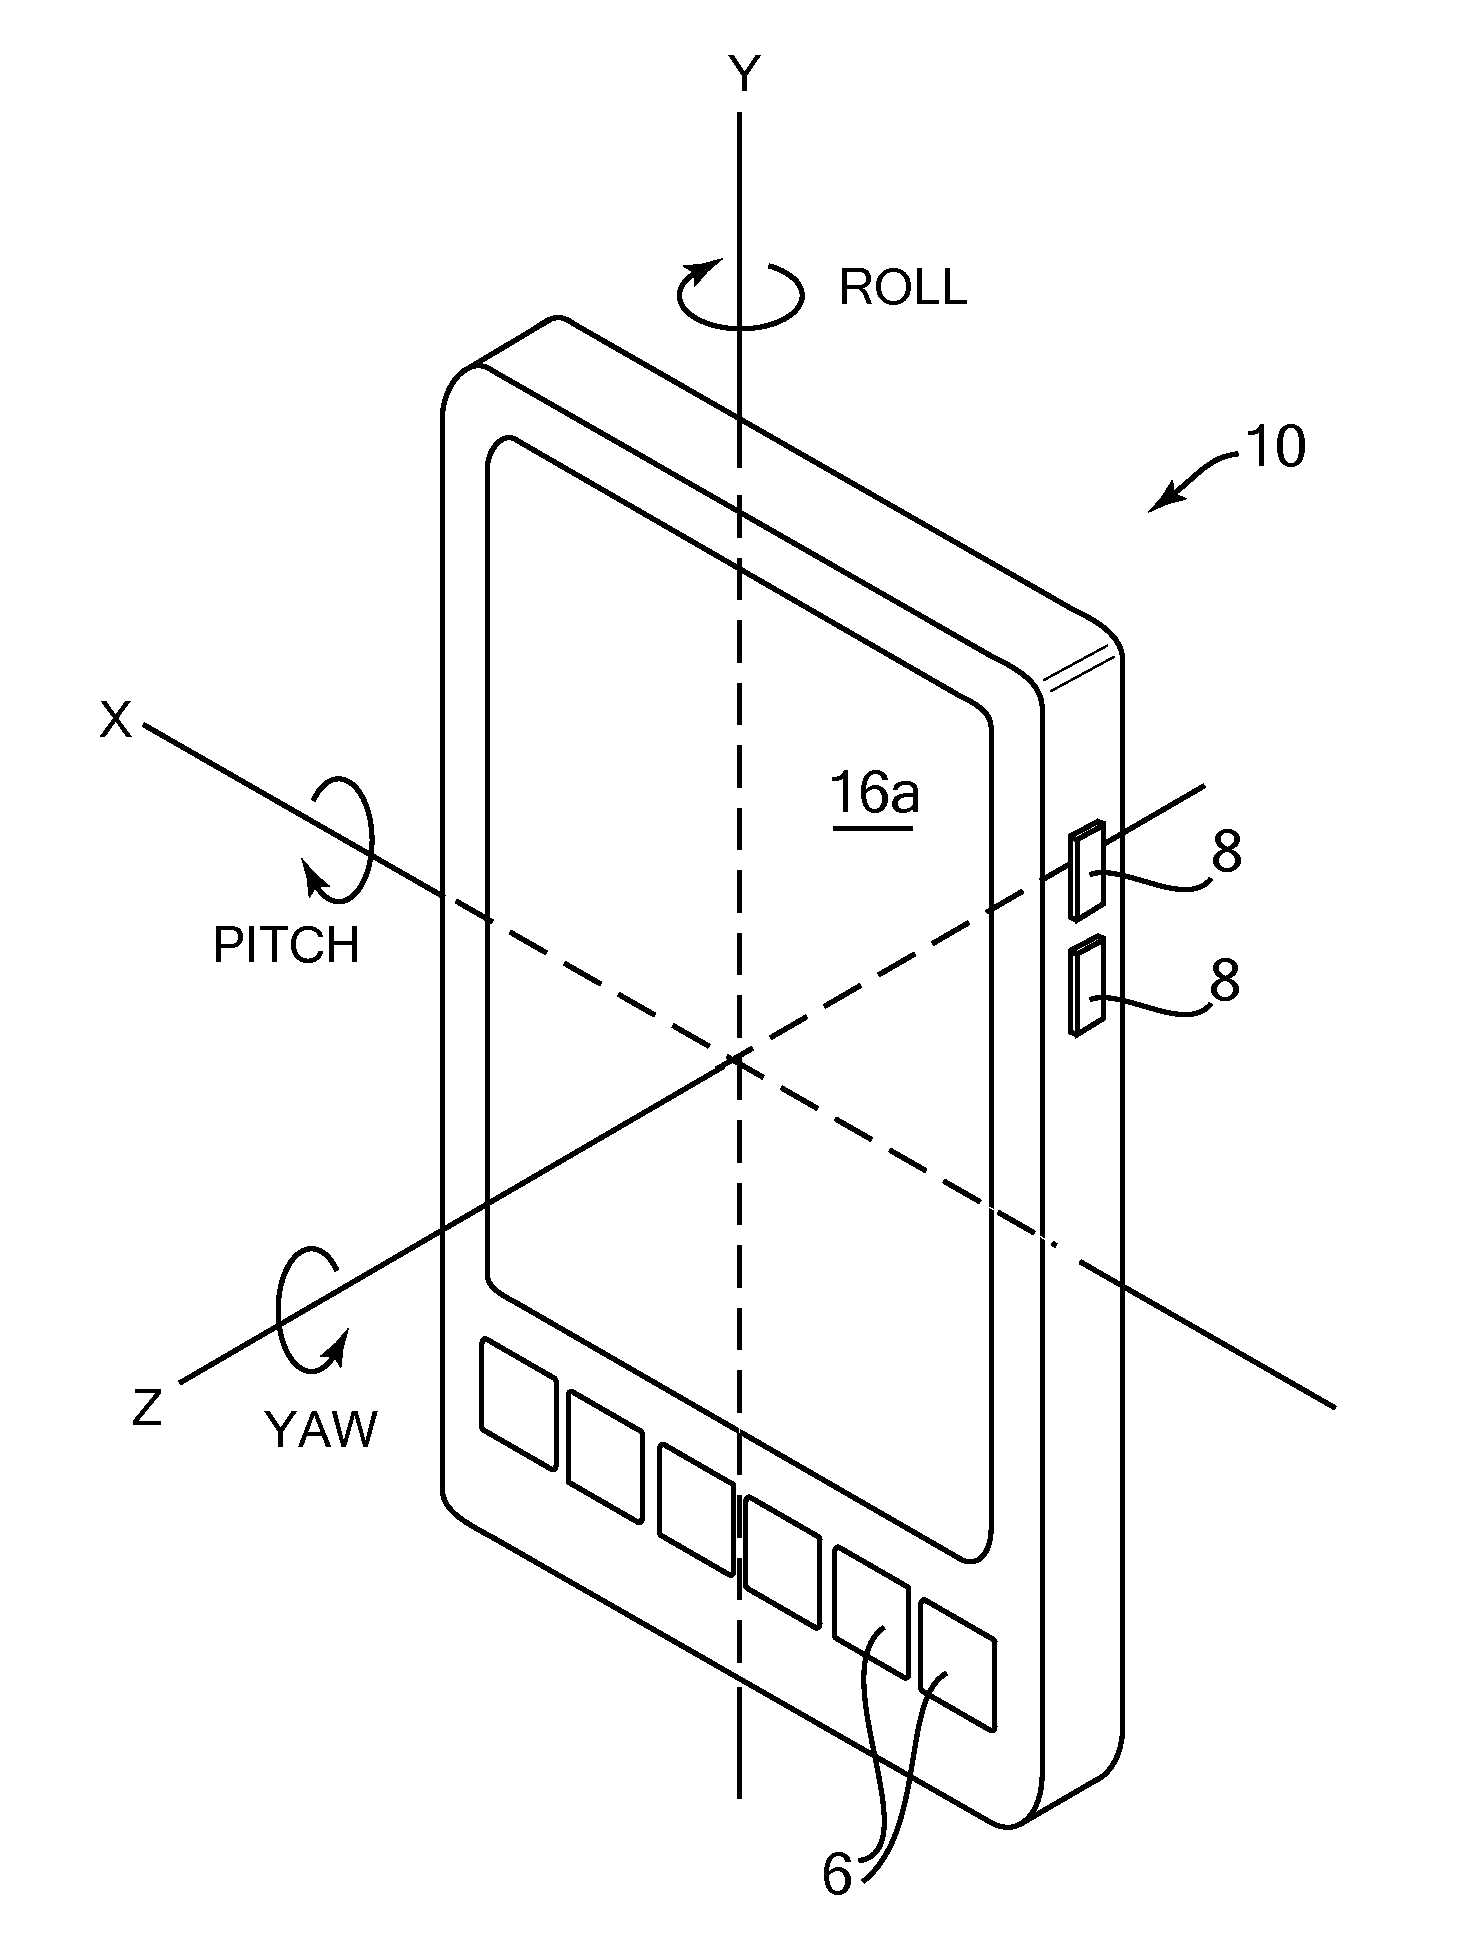 Mobile device user interface combining input from motion sensors and other controls